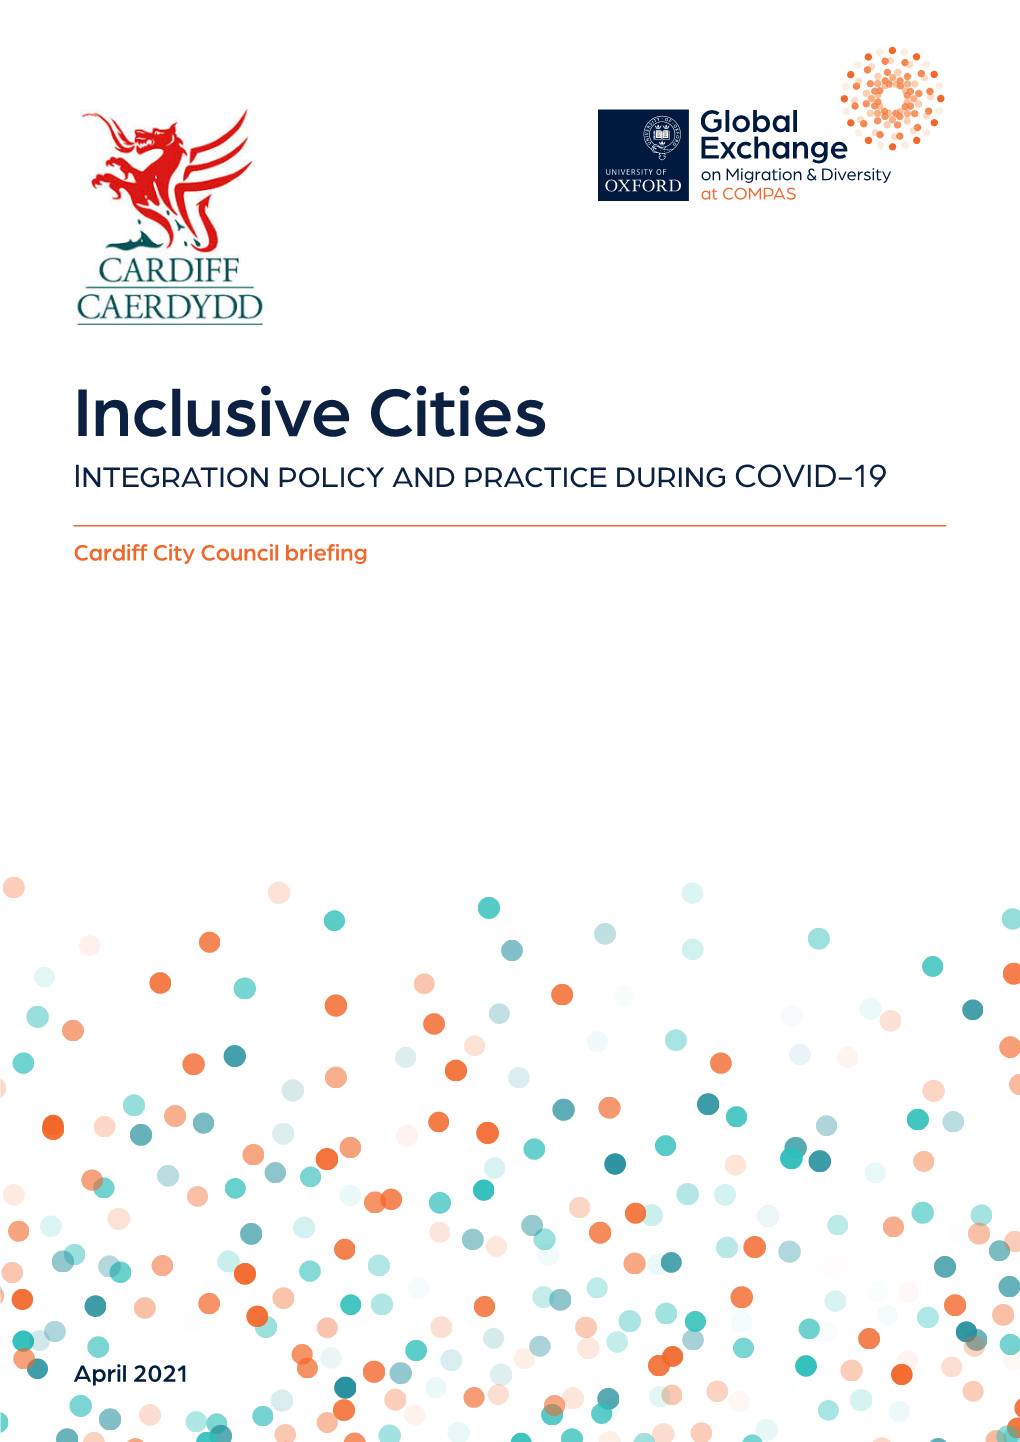 Inclusive Cities Integration Policy and Practice During COVID-19